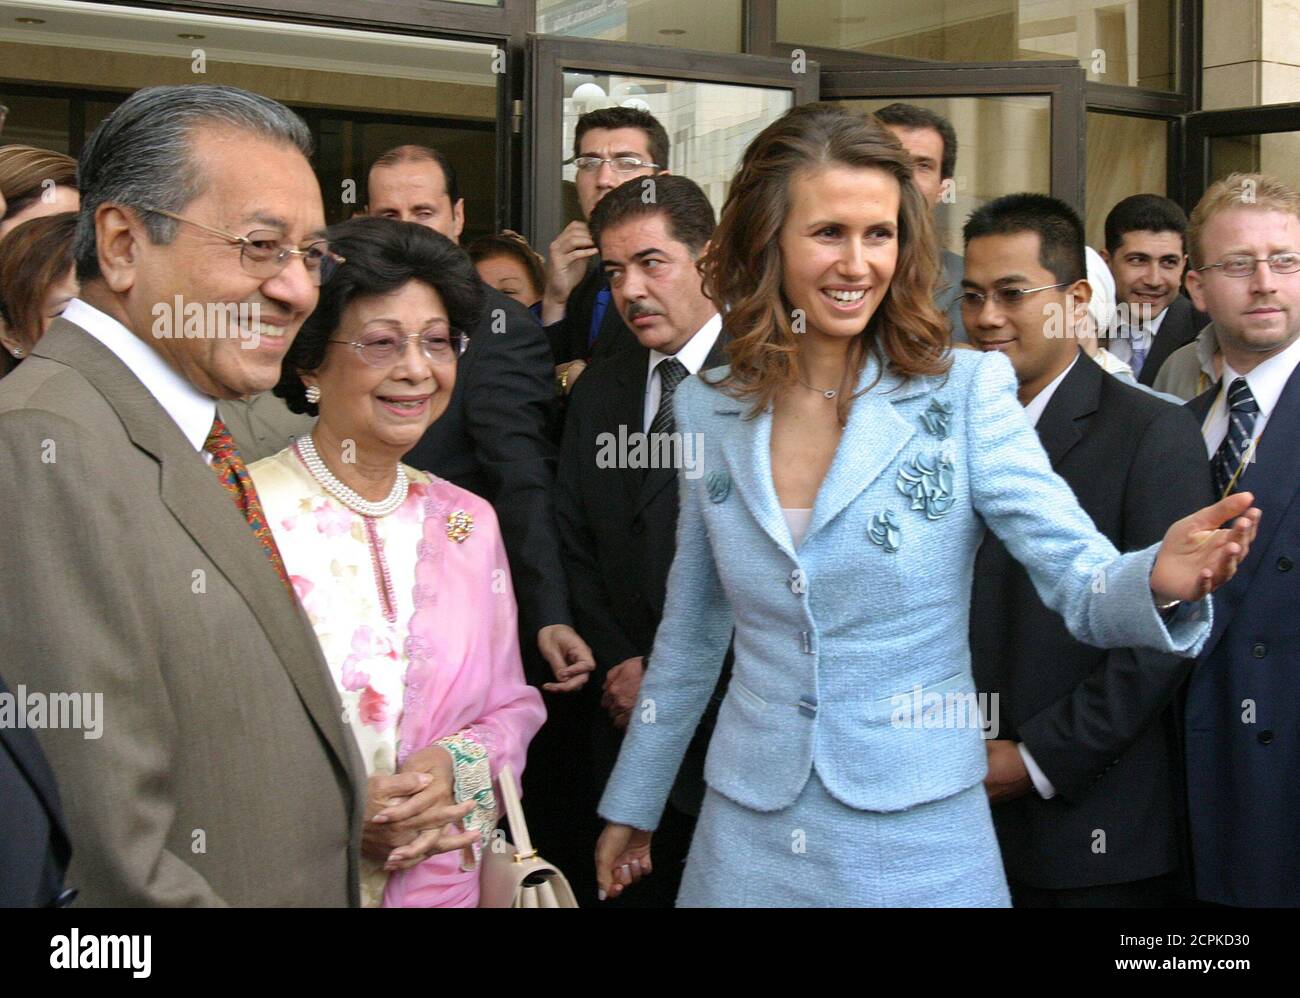 mrs-asma-al-assad-first-lady-of-syria-welcomes-mahathir-mohamad-former-prime-minister-of-malaysia-and-his-wife-during-the-opening-of-the-women-in-business-international-forum-2005-in-damascus-mrs-asma-al-assad-front-r-first-lady-of-syria-welcomes-mahathir-mohamad-front-l-former-prime-minister-of-malaysia-and-his-wife-during-the-opening-of-the-women-in-business-international-forum-2005-in-damascus-may-21-2005-the-conference-is-held-for-the-first-time-out-of-its-headquarters-in-london-and-will-give-an-opportunity-for-650-businesswomen-leading-figures-and-international-delegation-2CPKD30.jpg